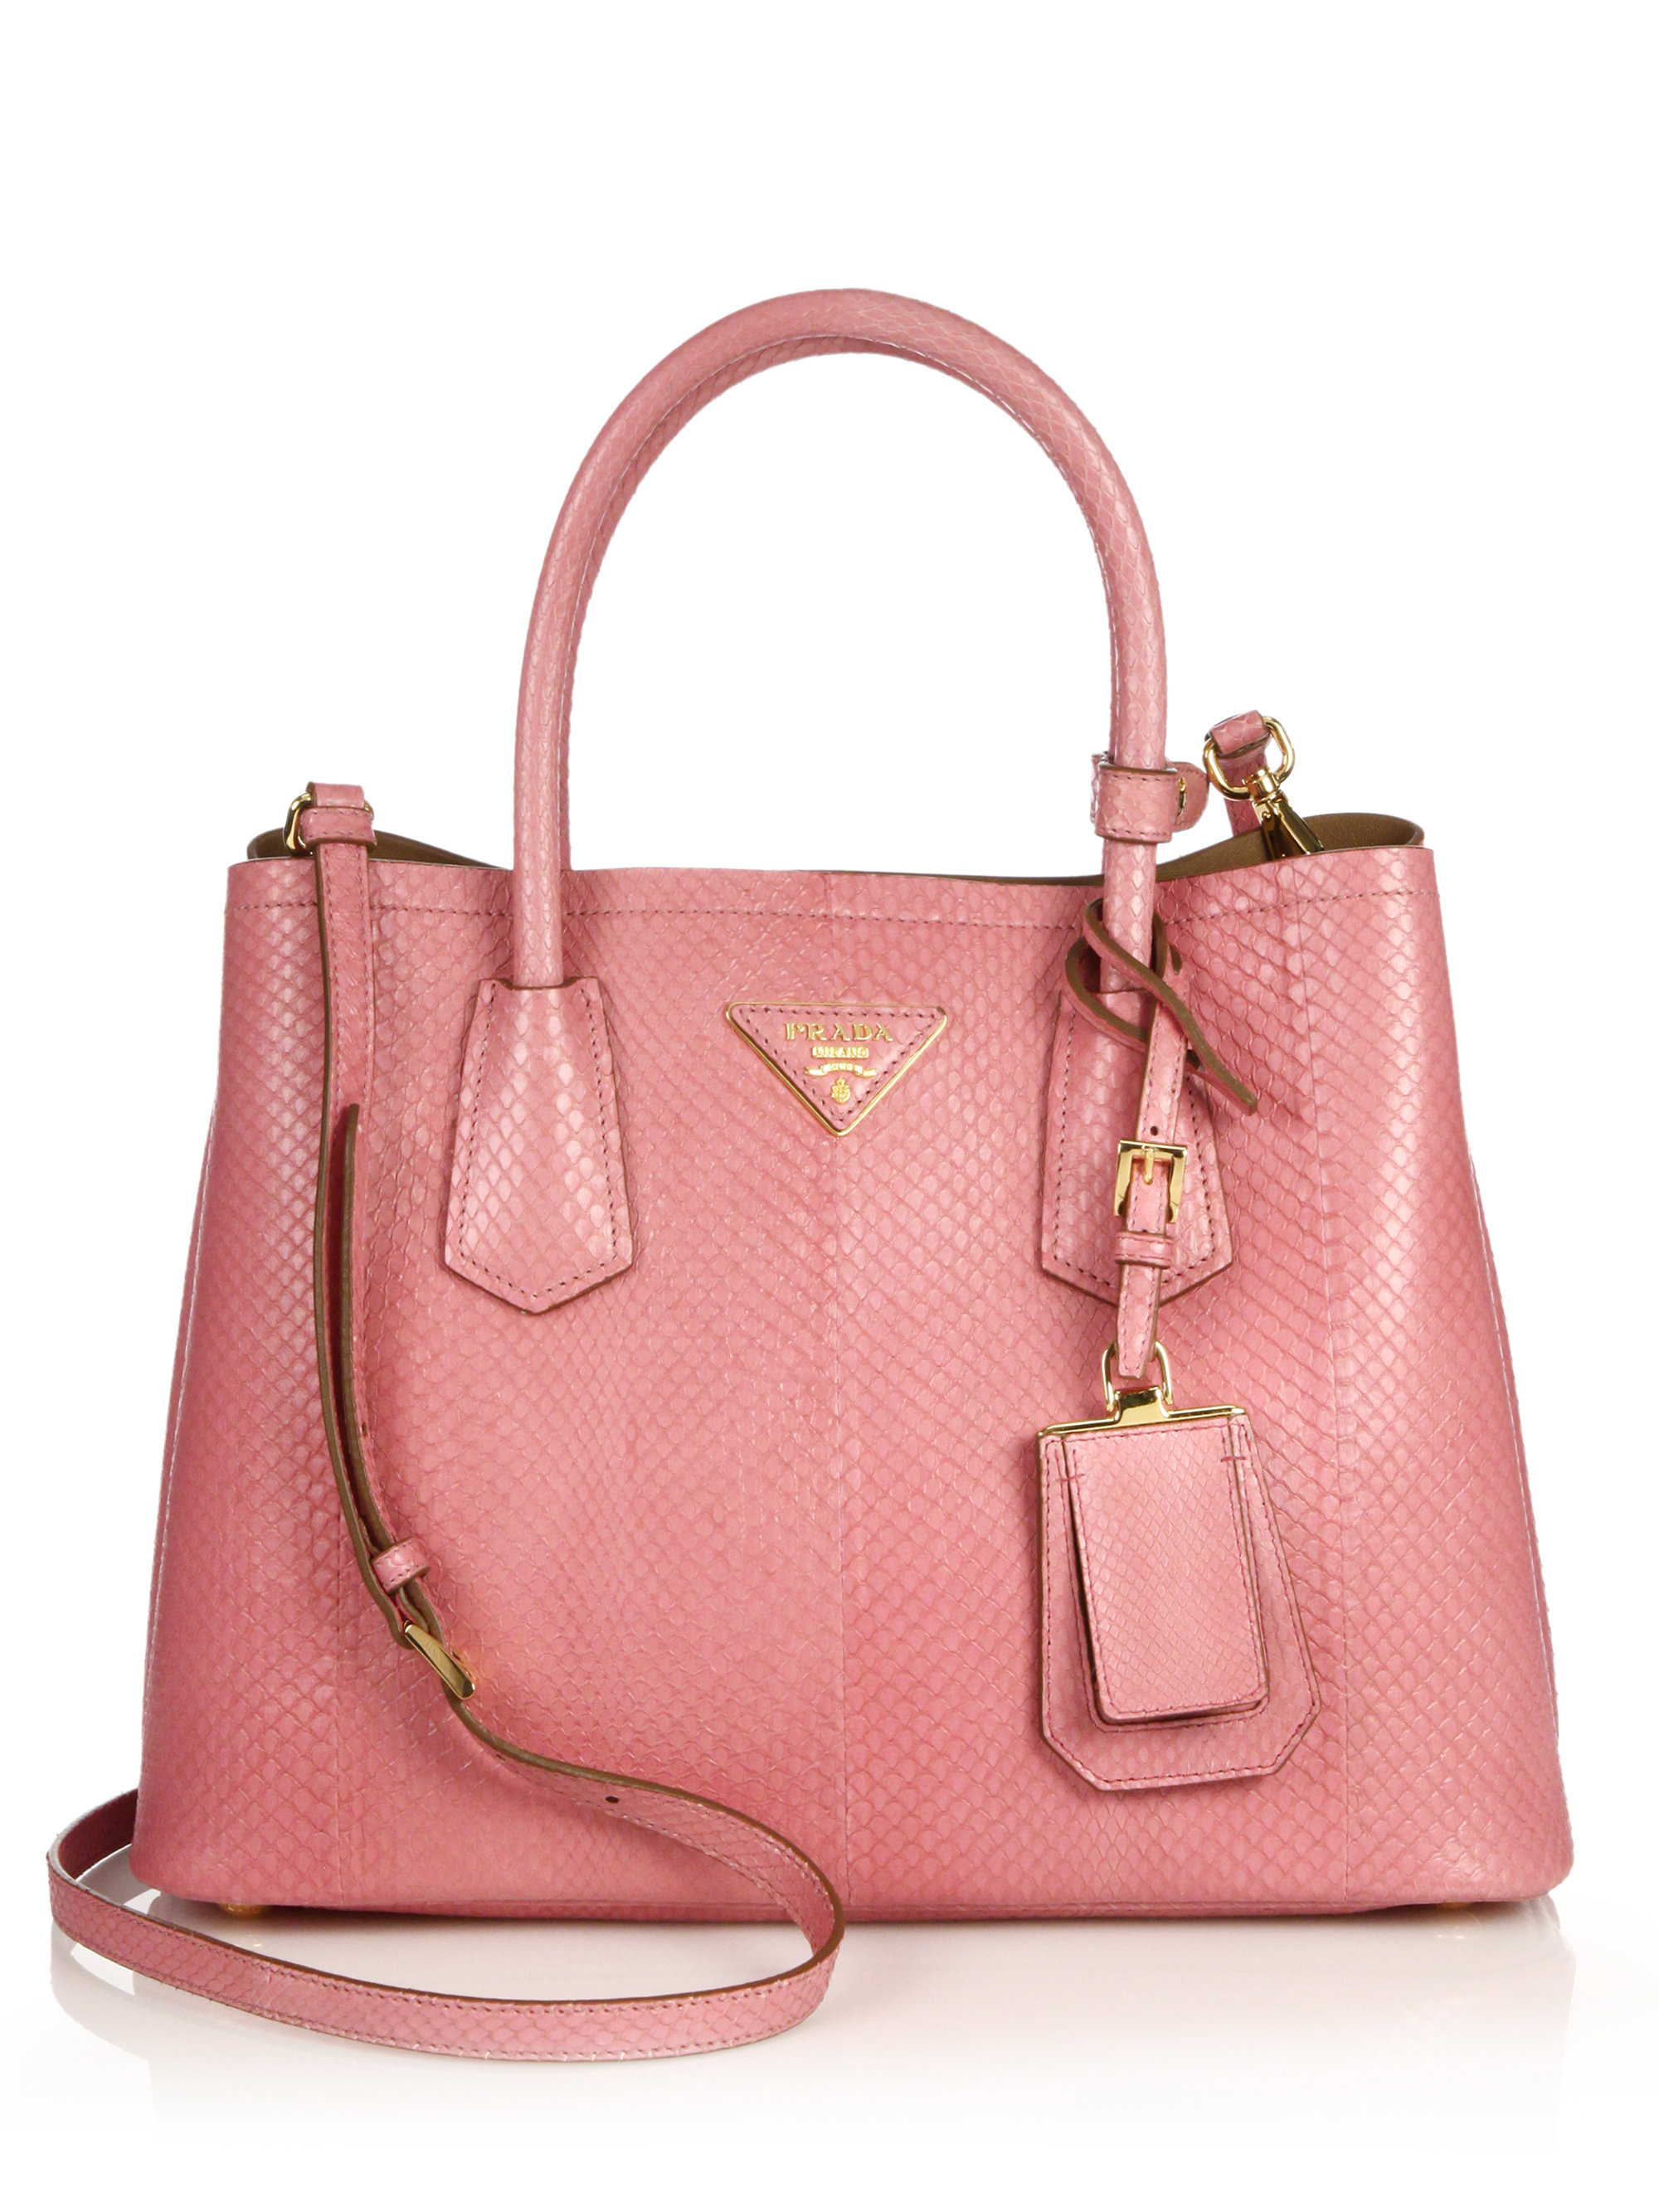 Prada Ayers Double Bag in Pink | Lyst